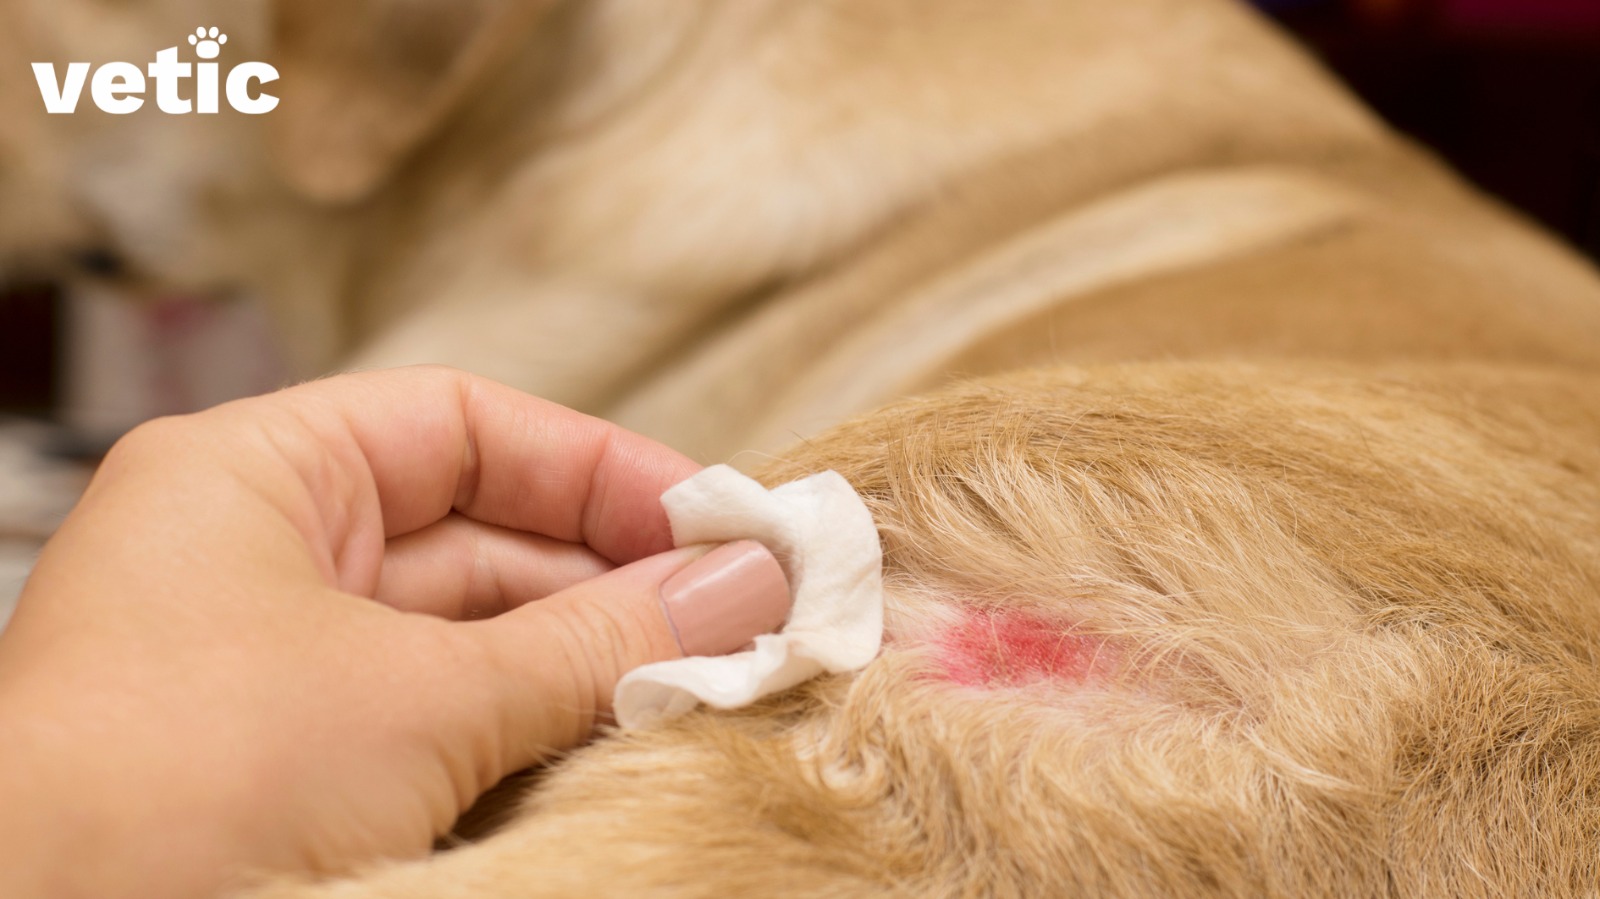 A hand cleaning the wound of a medium-haired, golden fur-ed dog. You can use a clean gauze and new saline to clean your dog's wounds if they have been bitten by another dog.